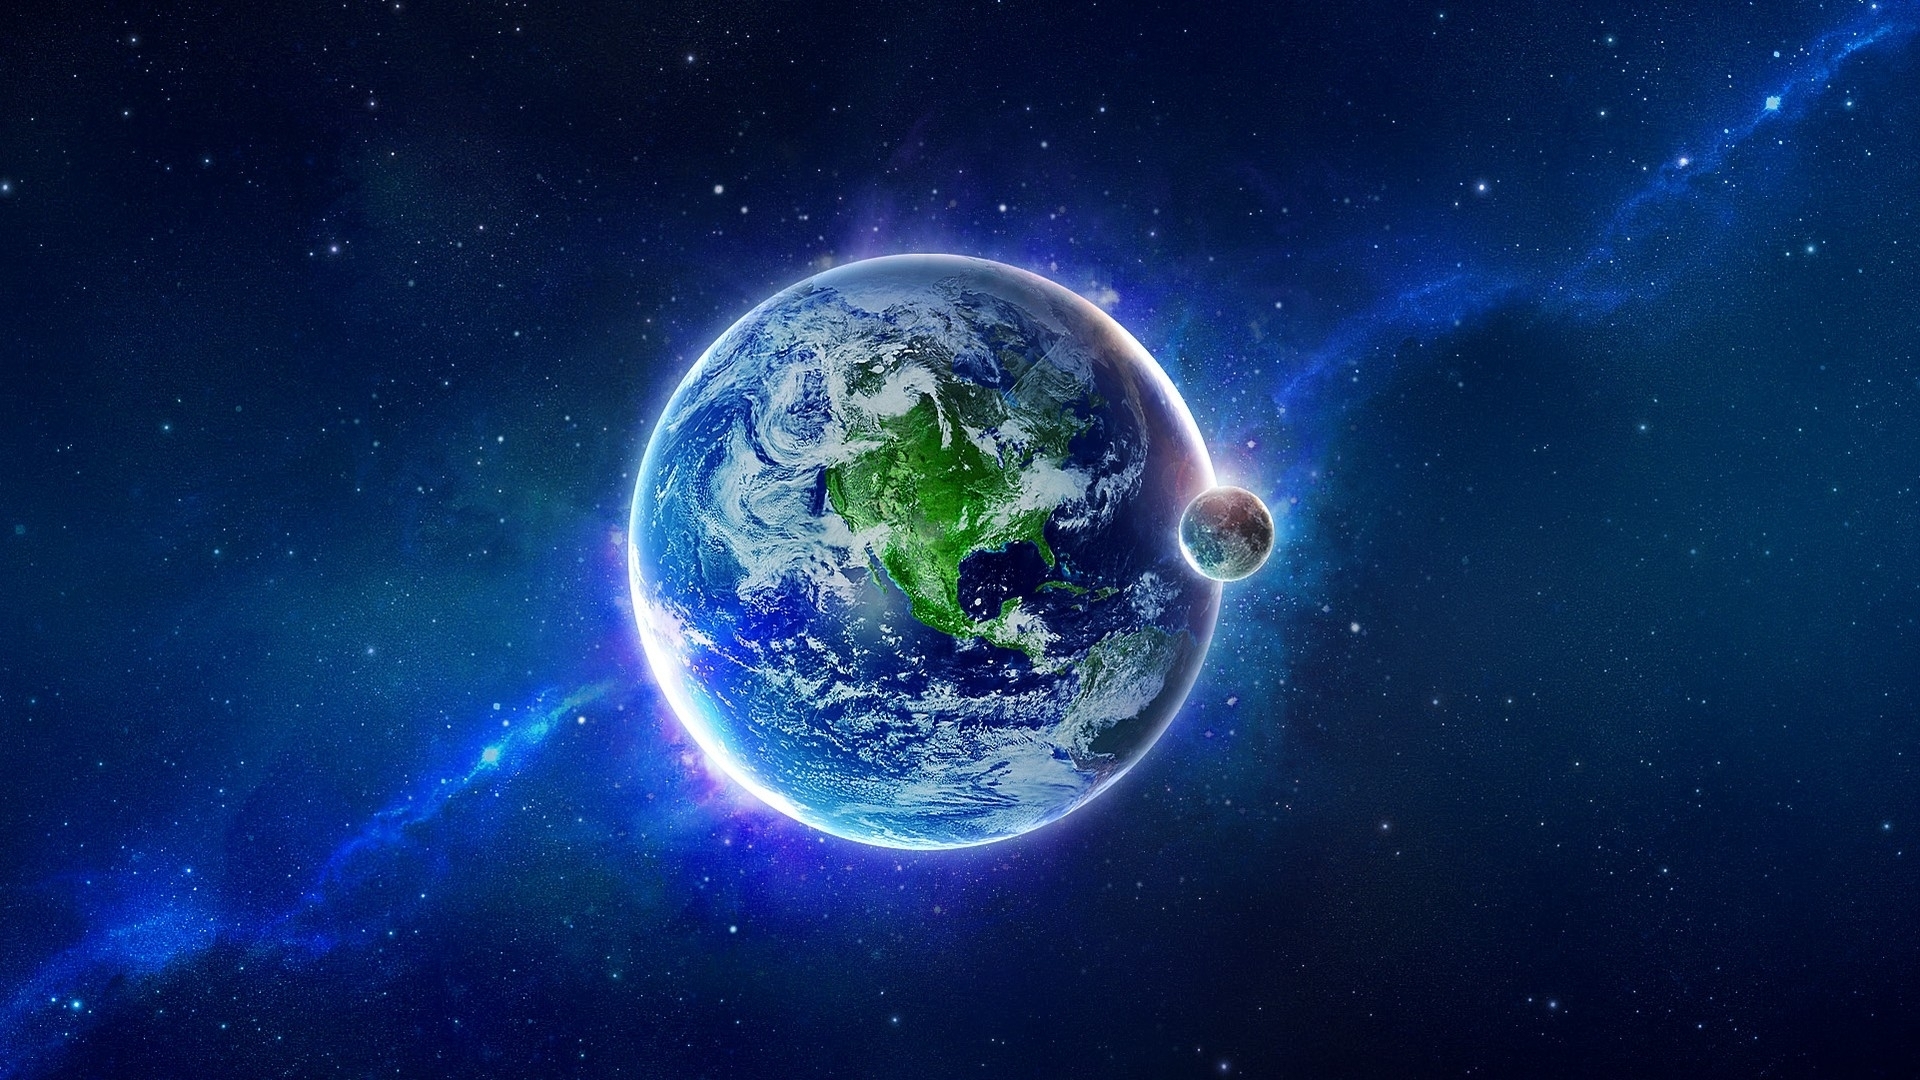 Wallpapers planets stars earth on the desktop